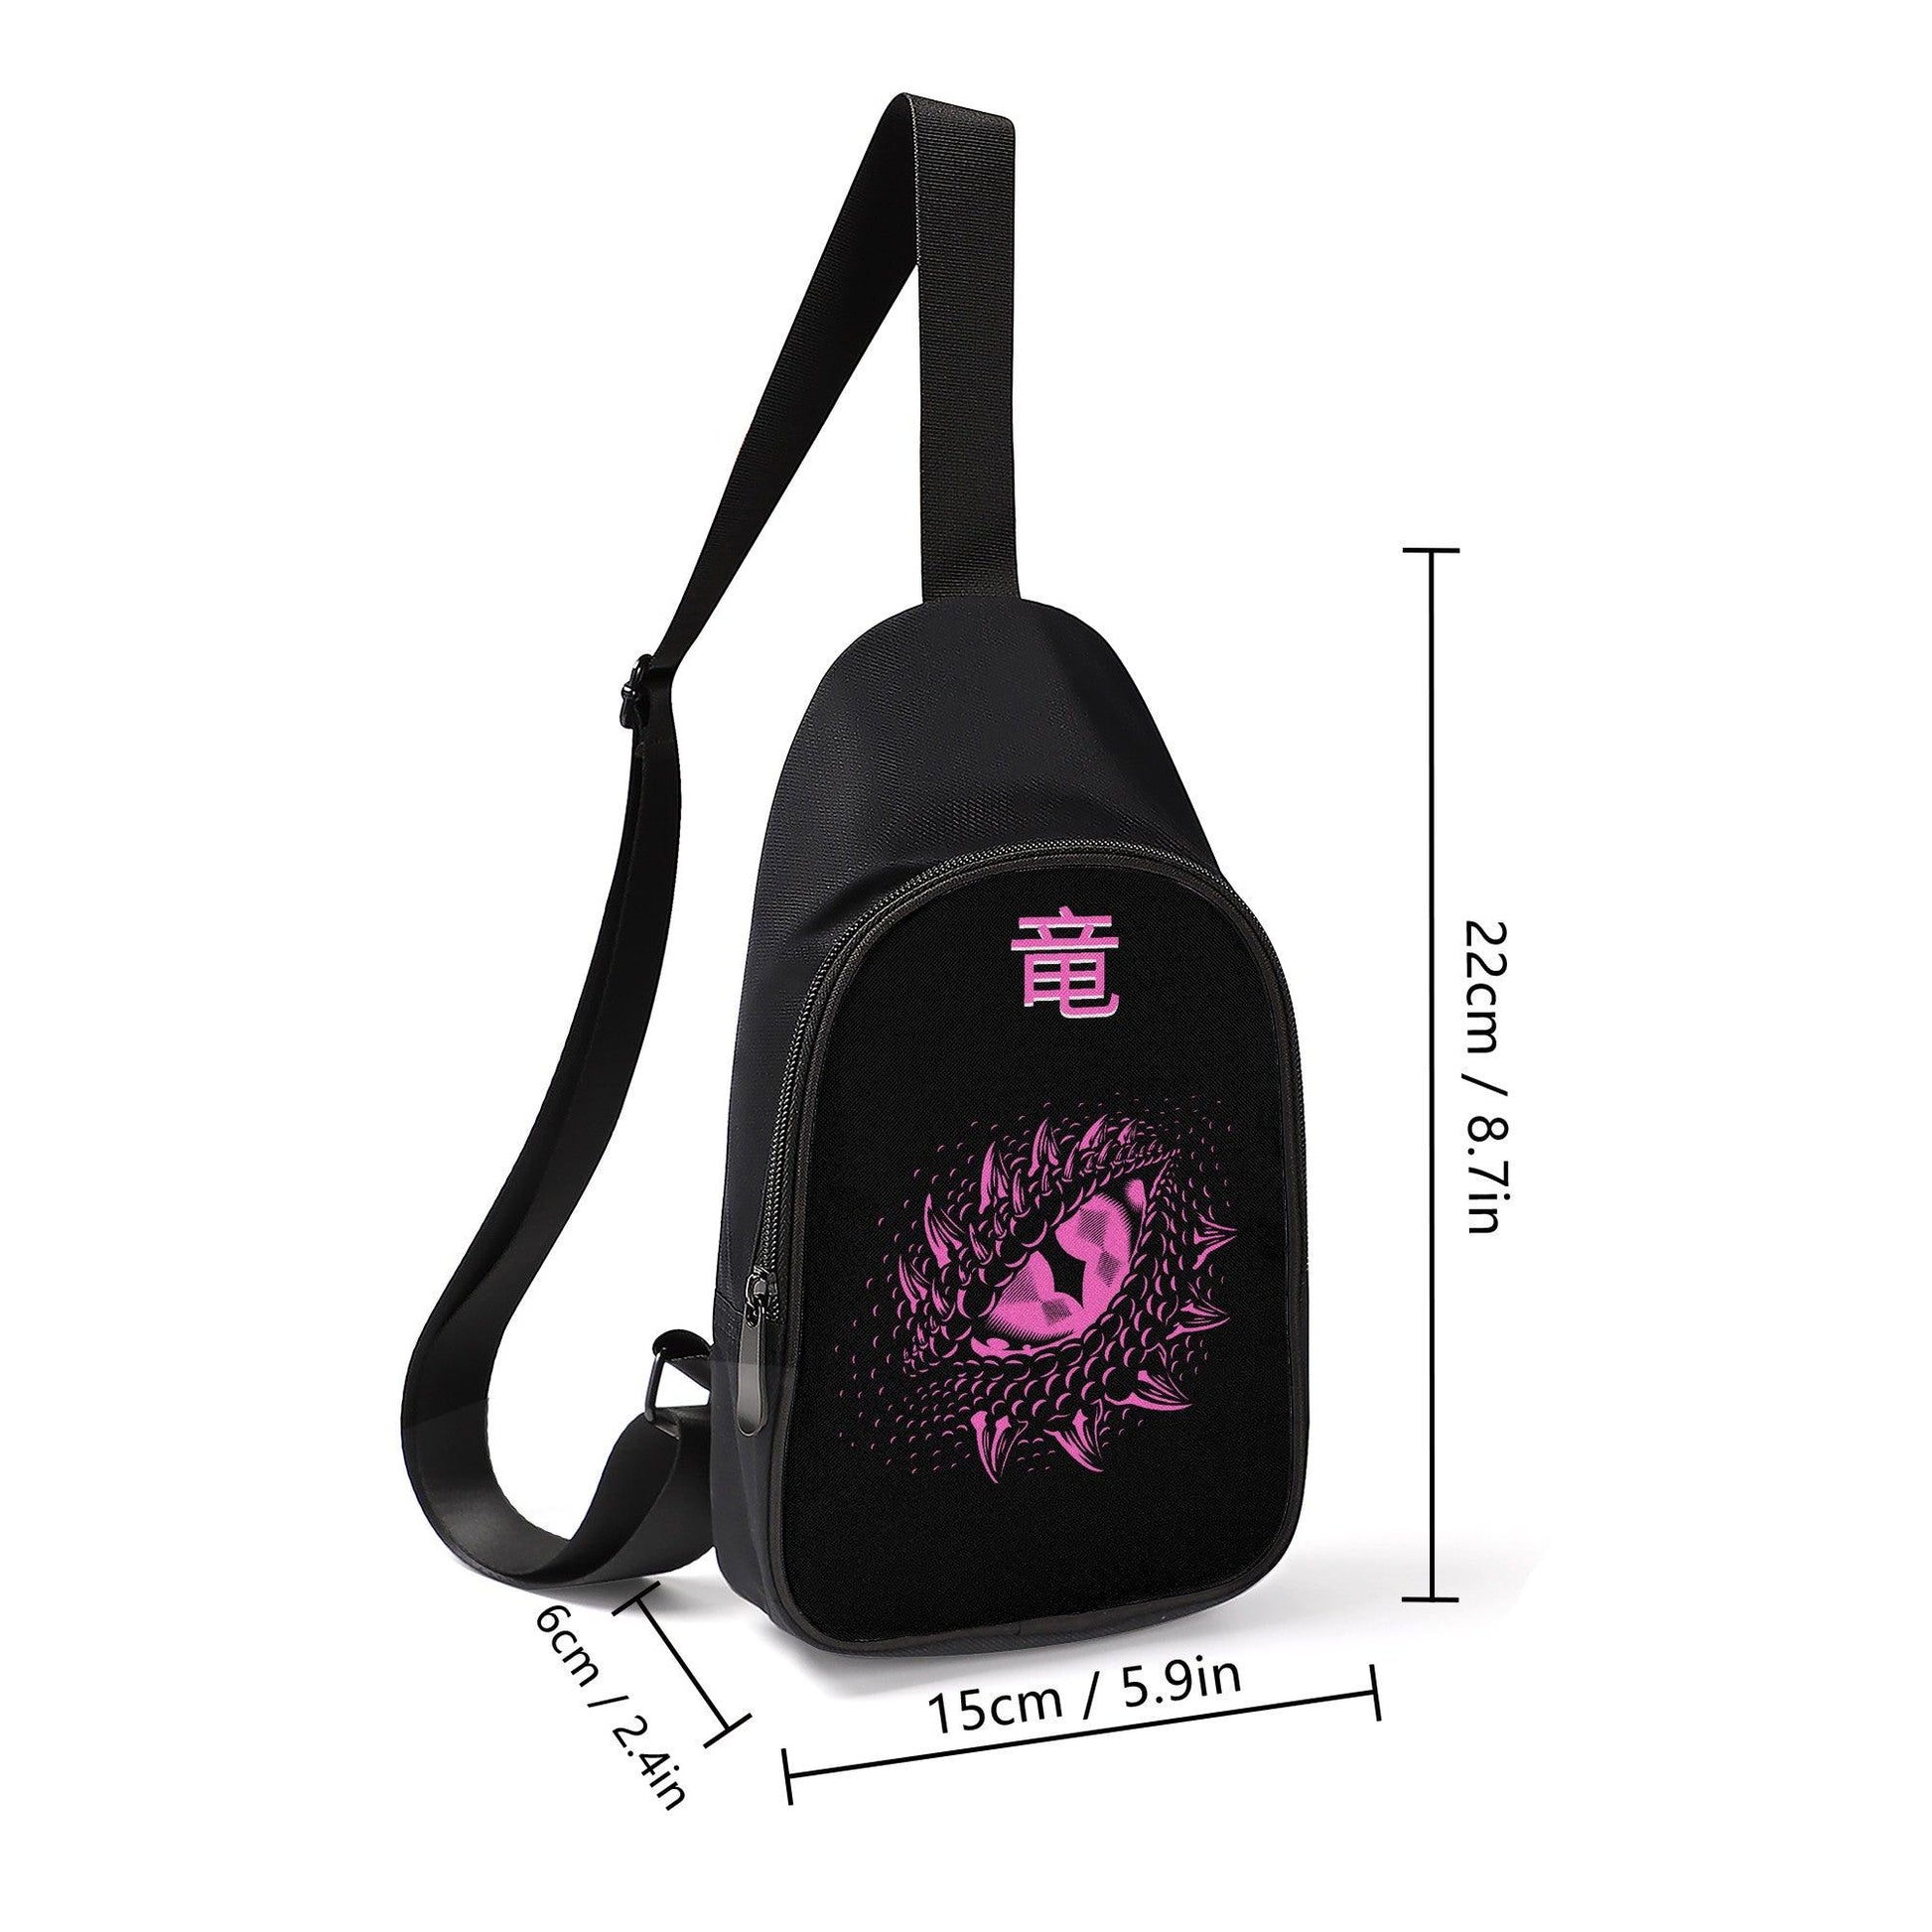 The Pink Dragon Chest Bag